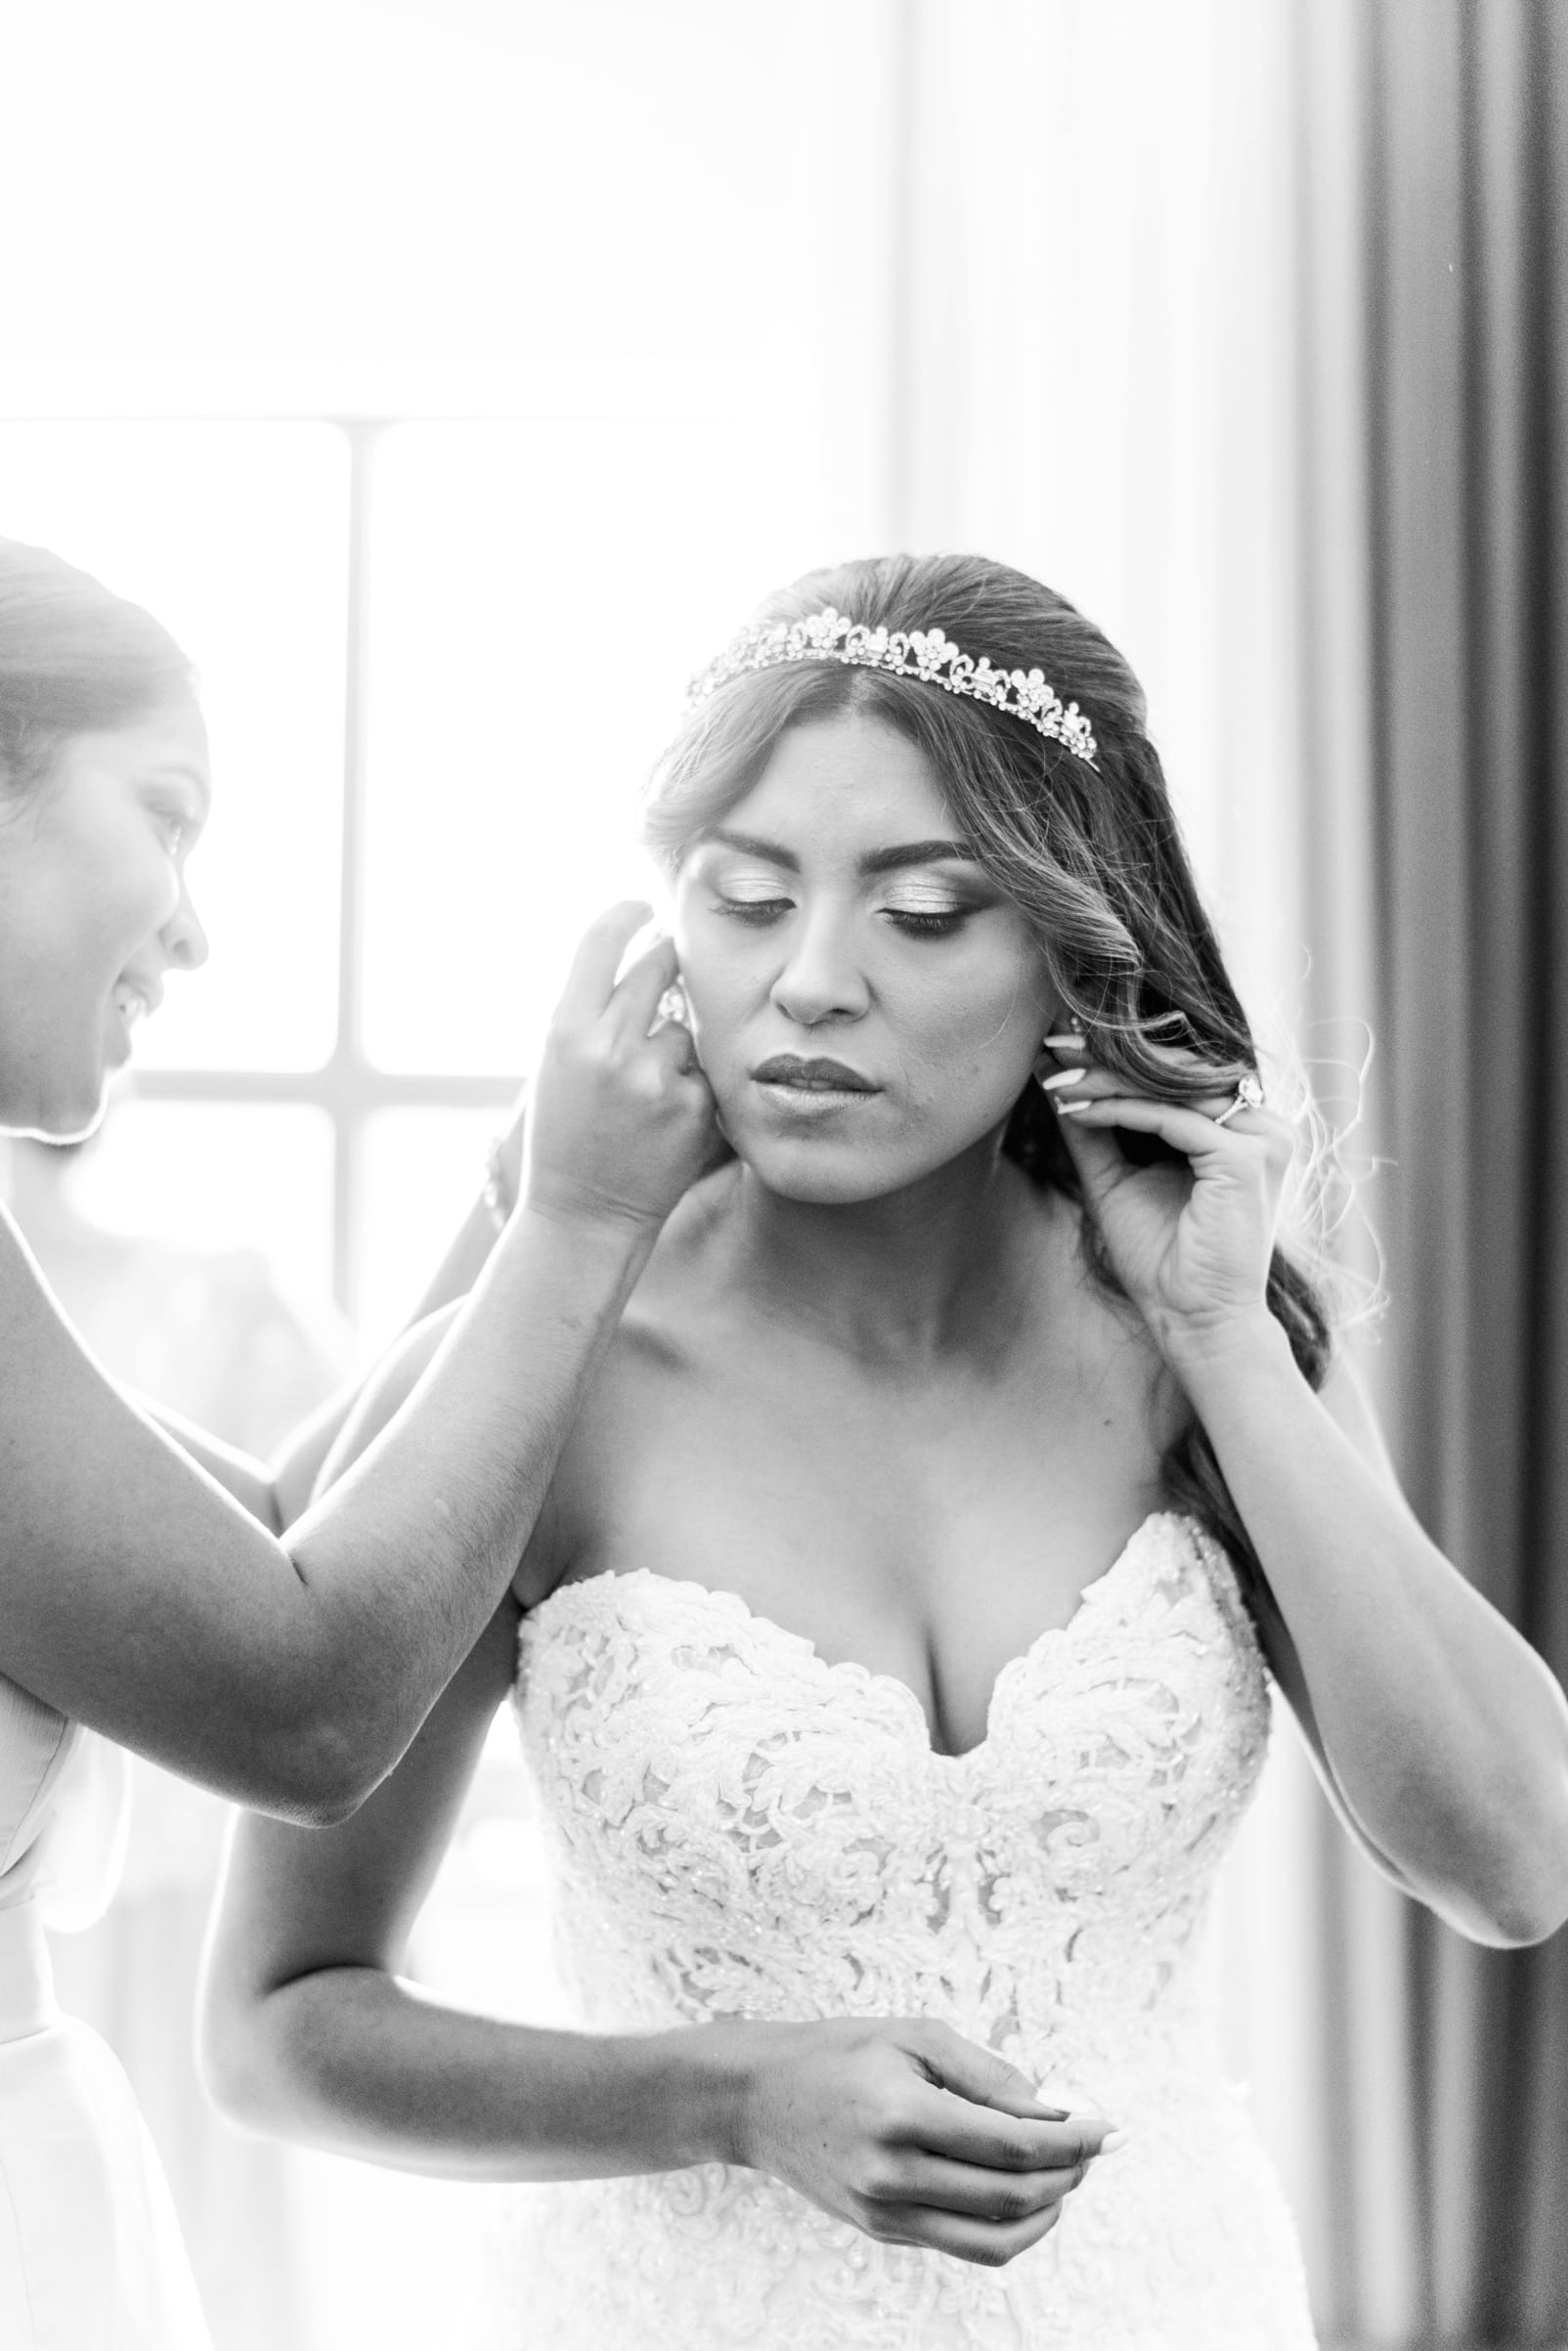 Raleigh, NC bride putting in her earrings photo in black and white photo